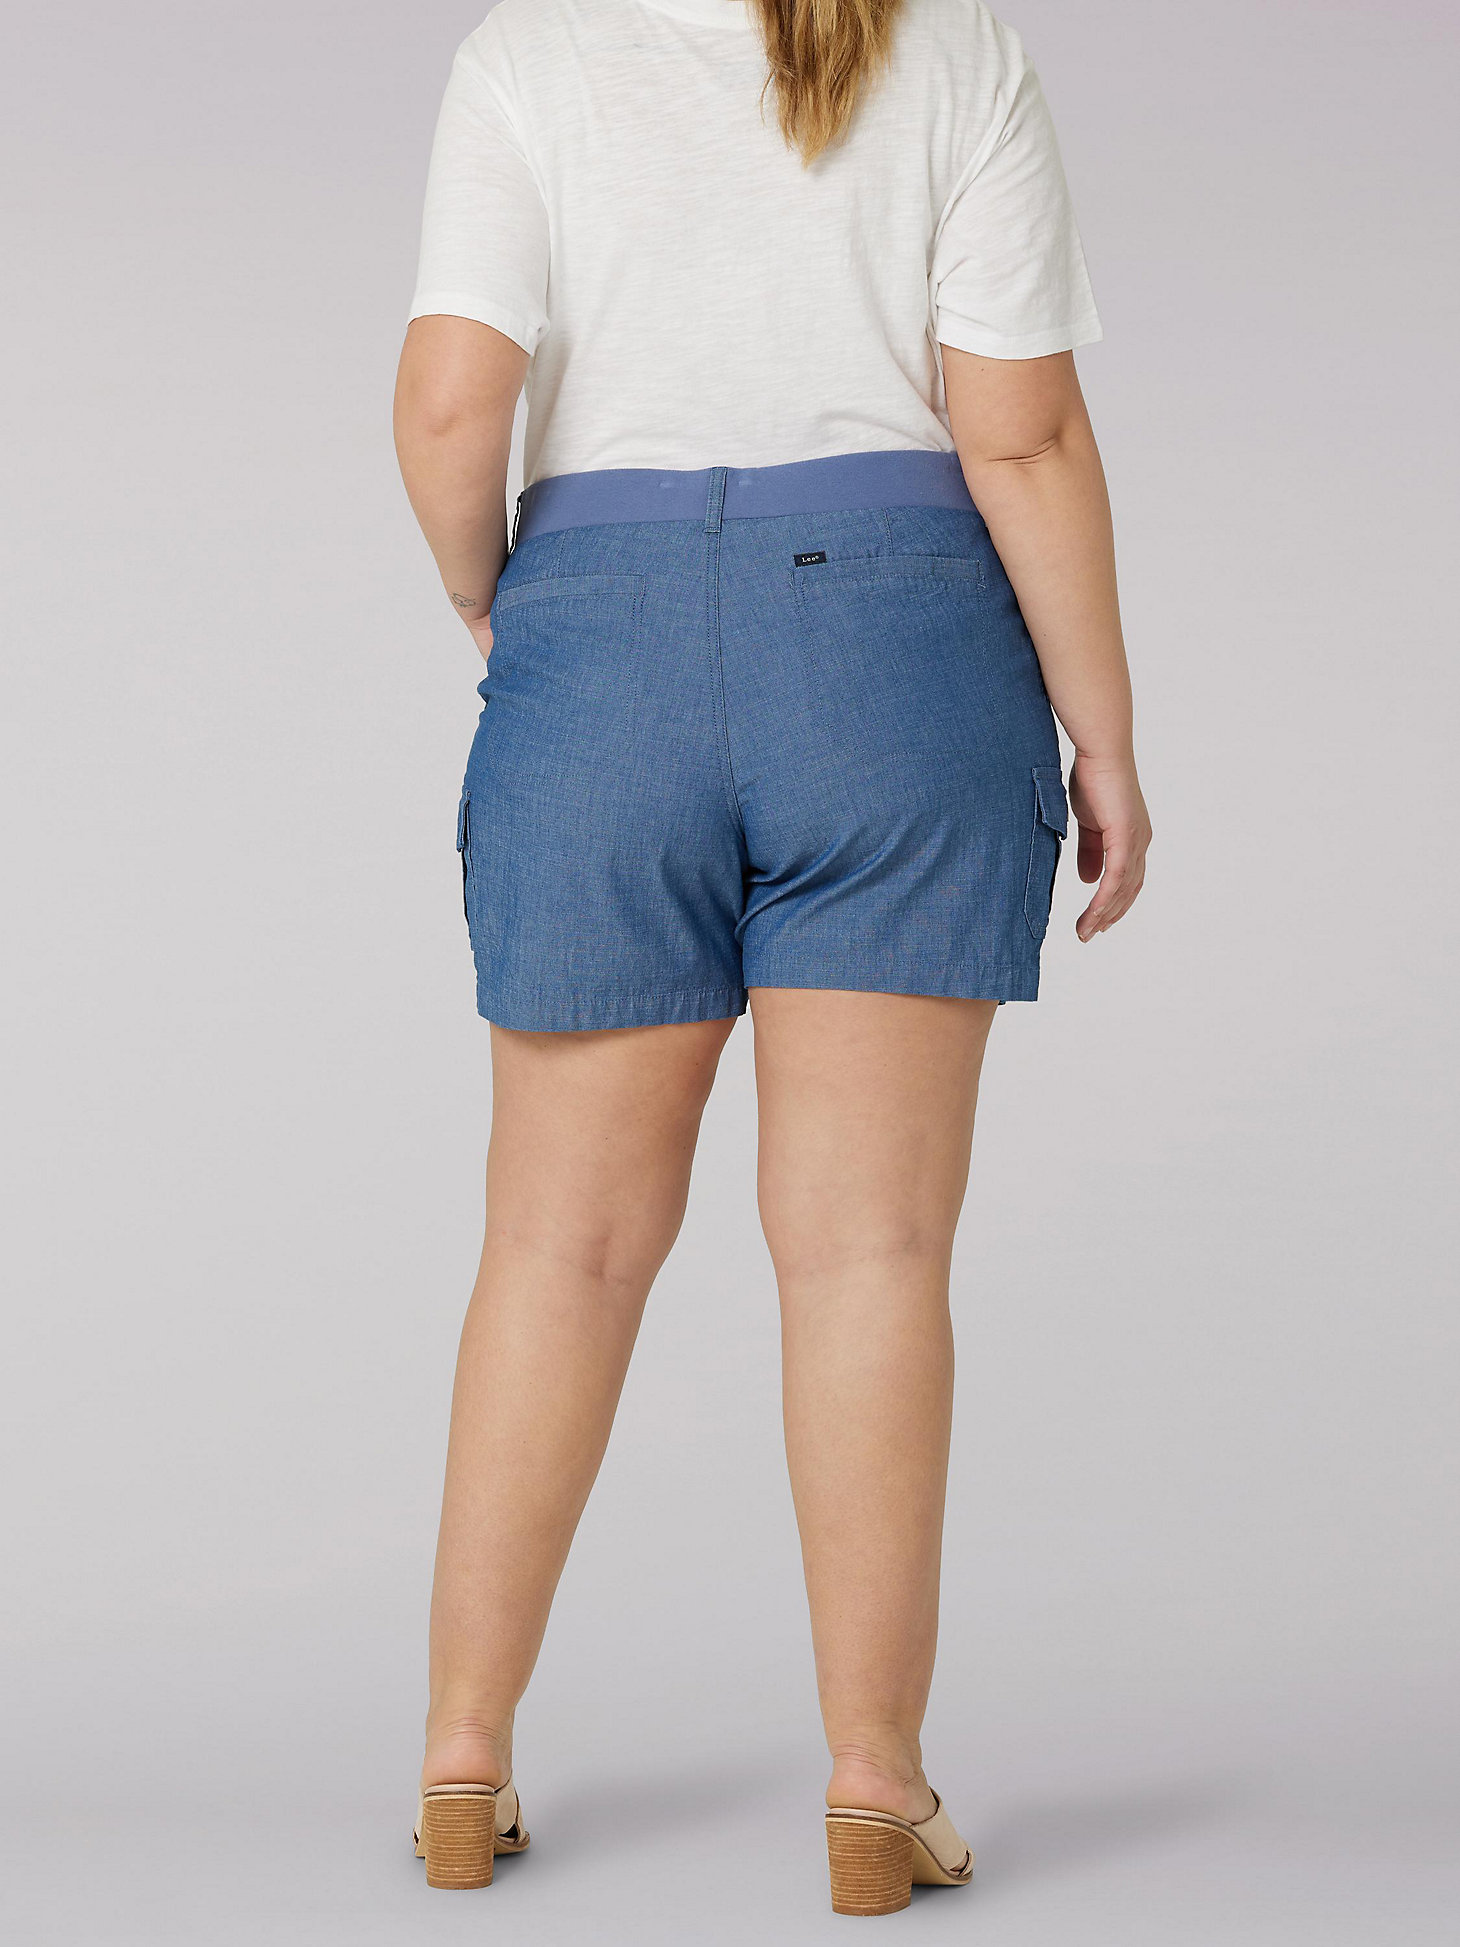 Women's Flex-to-Go Seamed Relaxed Fit Cargo Short (Plus) in Rinse Chanbray alternative view 1